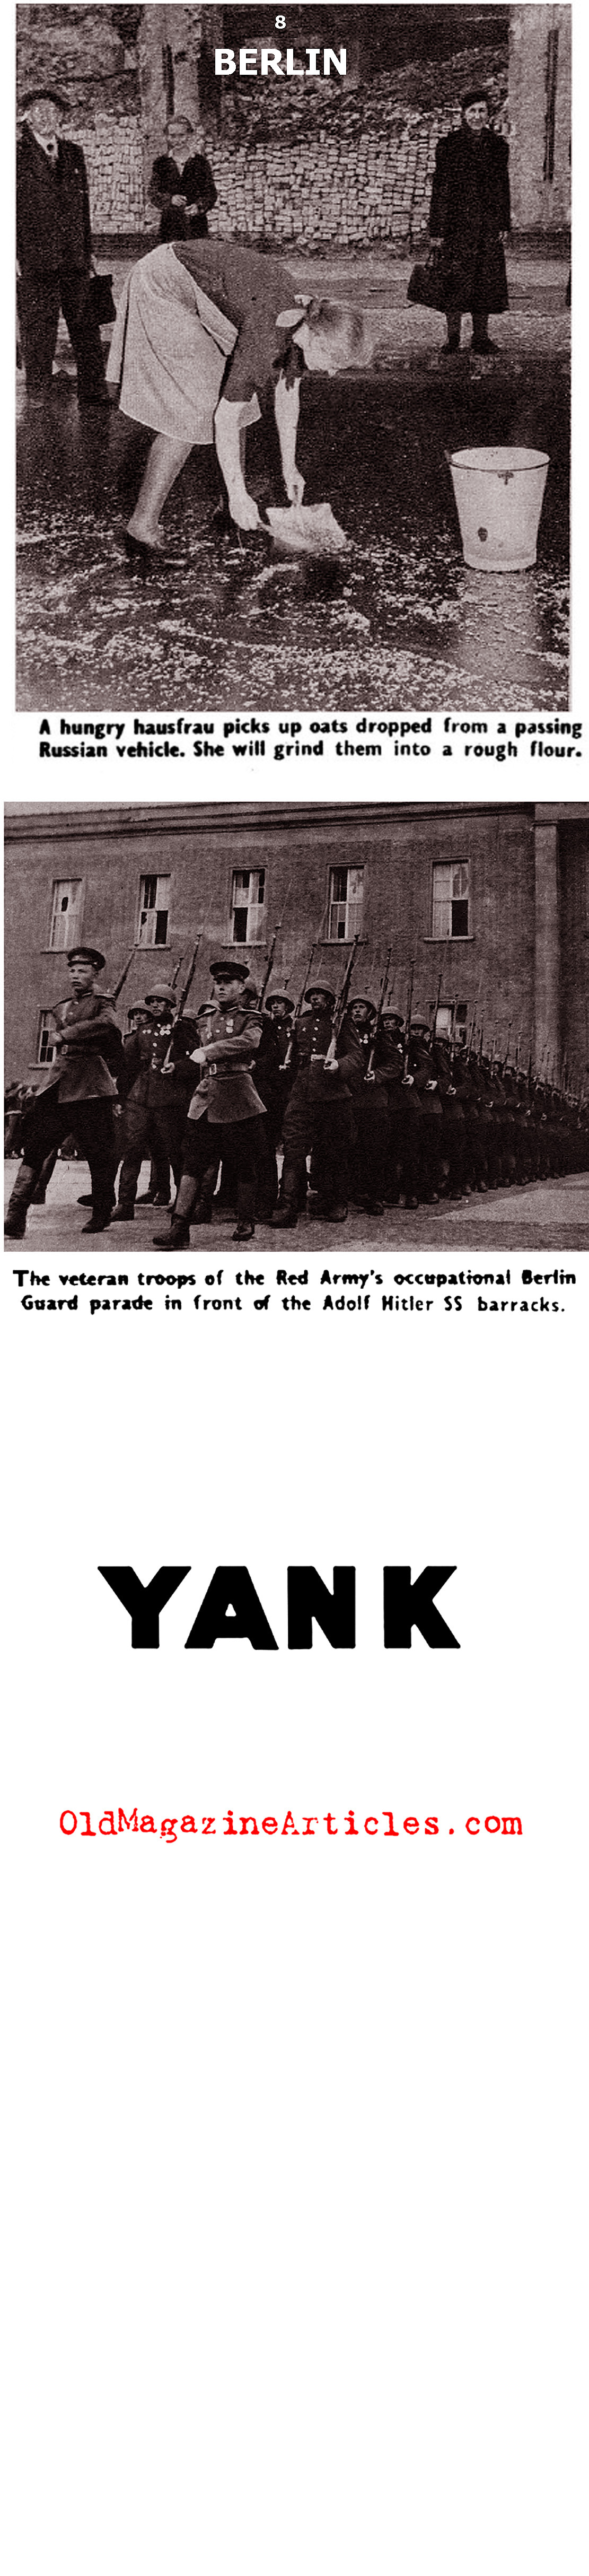 Occupied Berlin and the Summer of '45 (Yank Magazine, 1945)